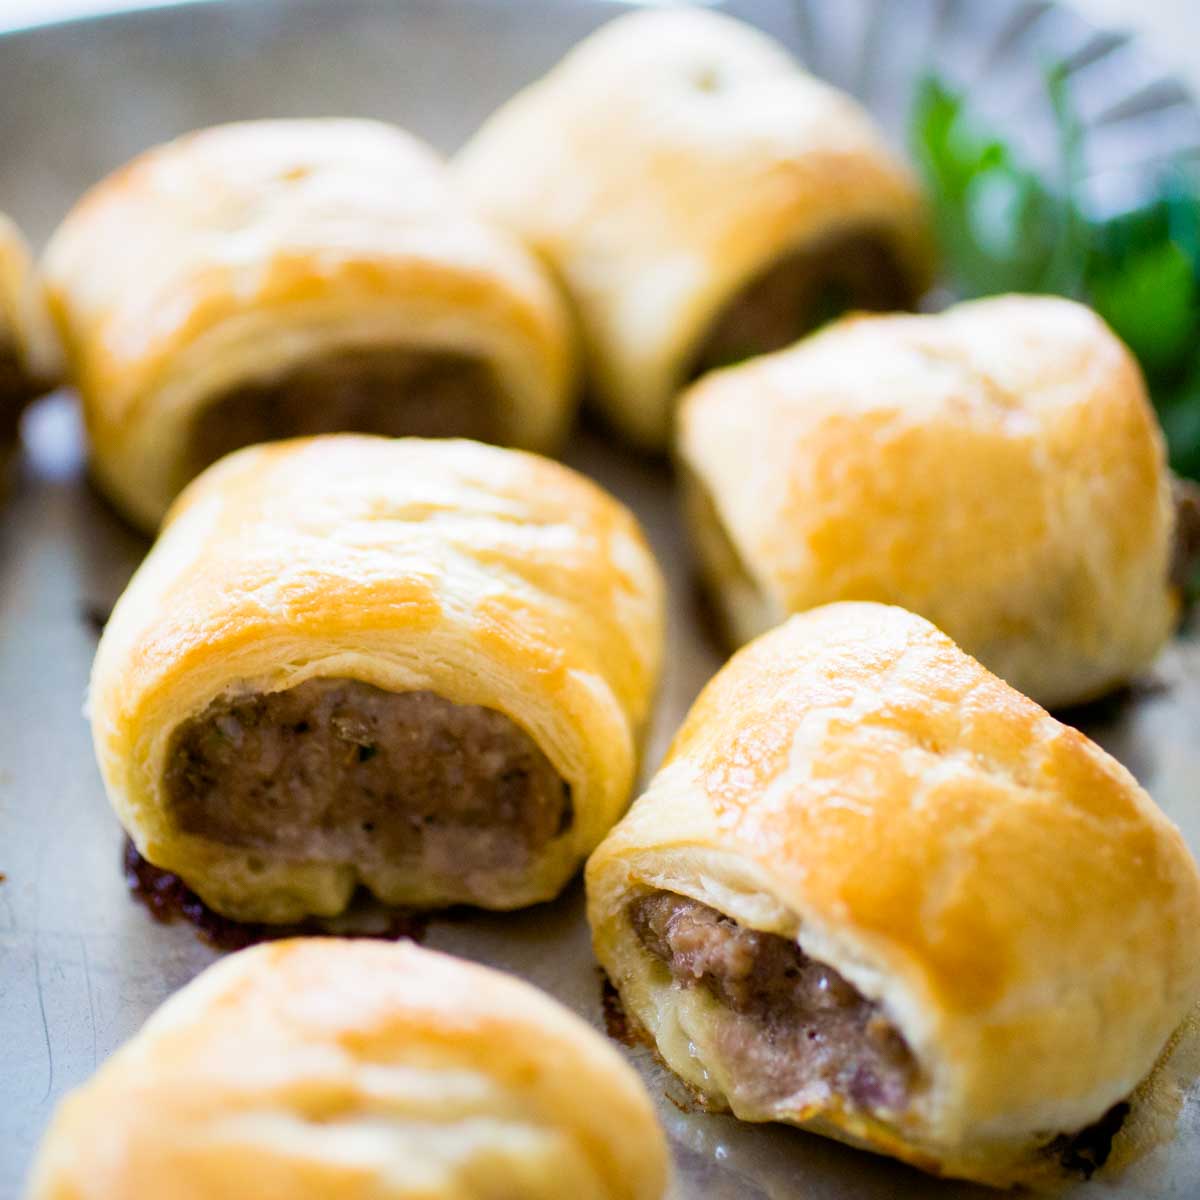 A tray of sausage rolls shows the golden brown puff pastry wrap and savory sausage filling.